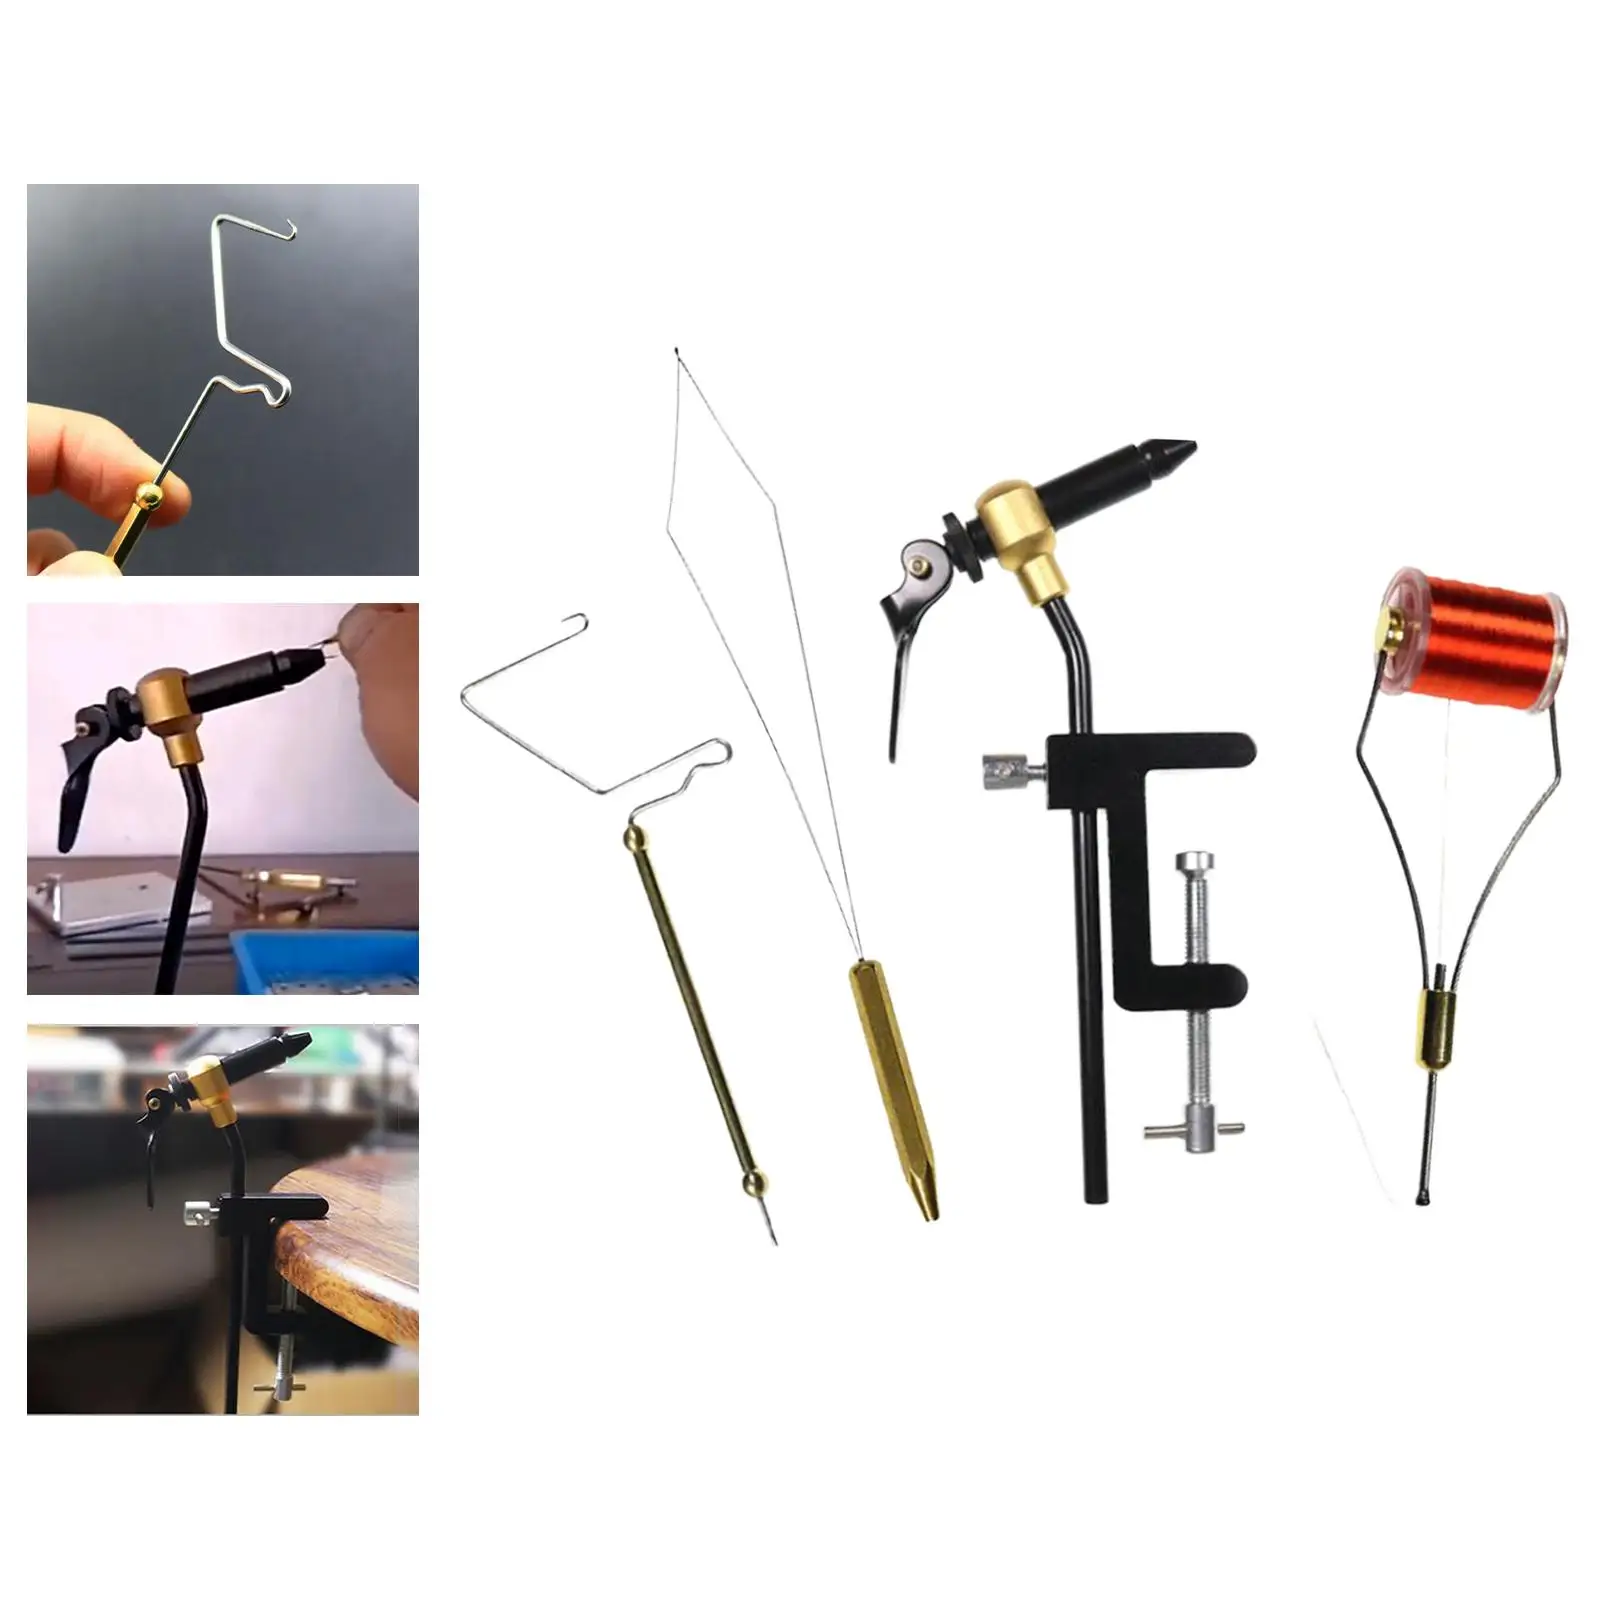 4 Pieces Fly Tying Tools Kit Fly Tying Vise Fishing Tool Whip Finisher